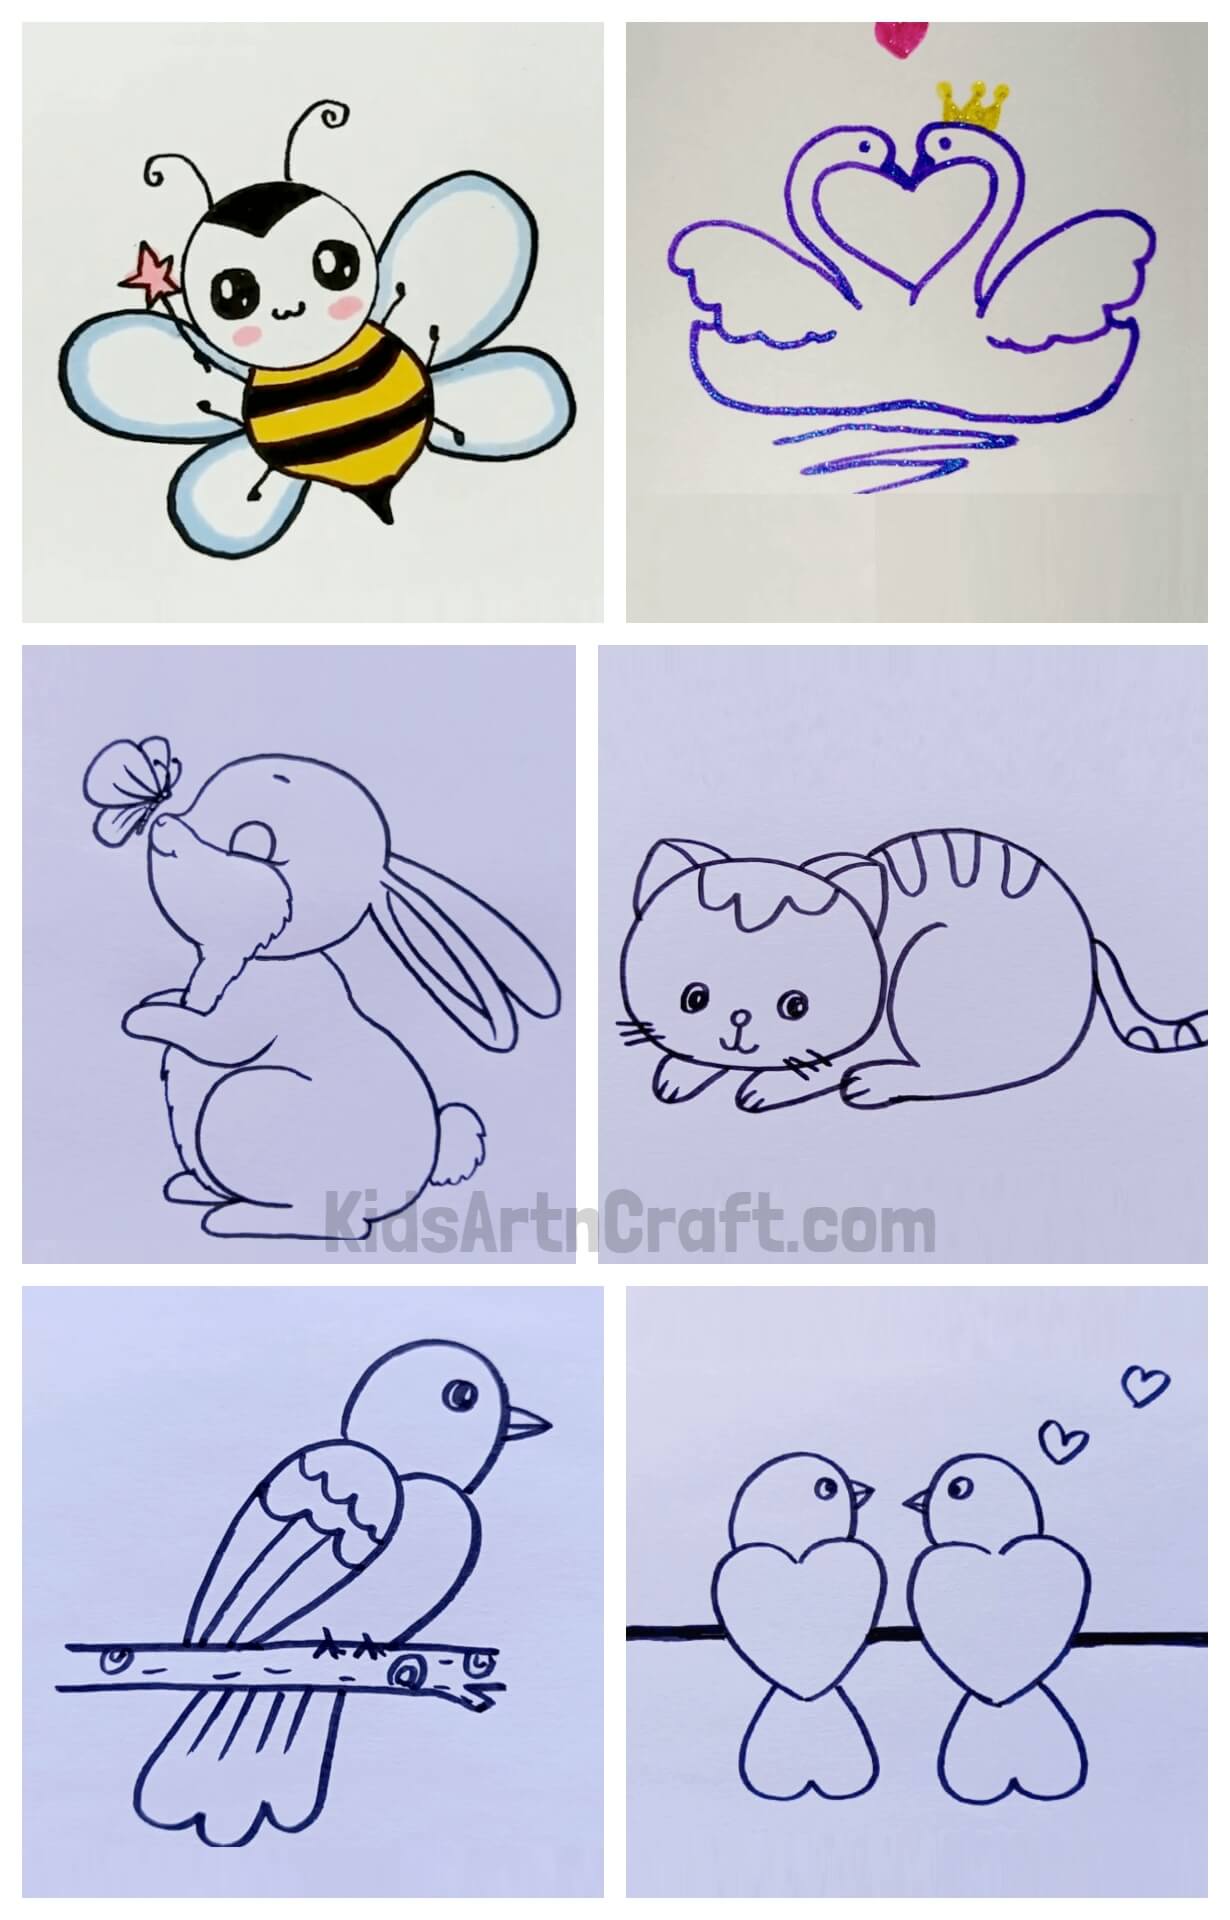 Let's Draw Cute Creatures From Nature's Lap - Kids Art & Craft